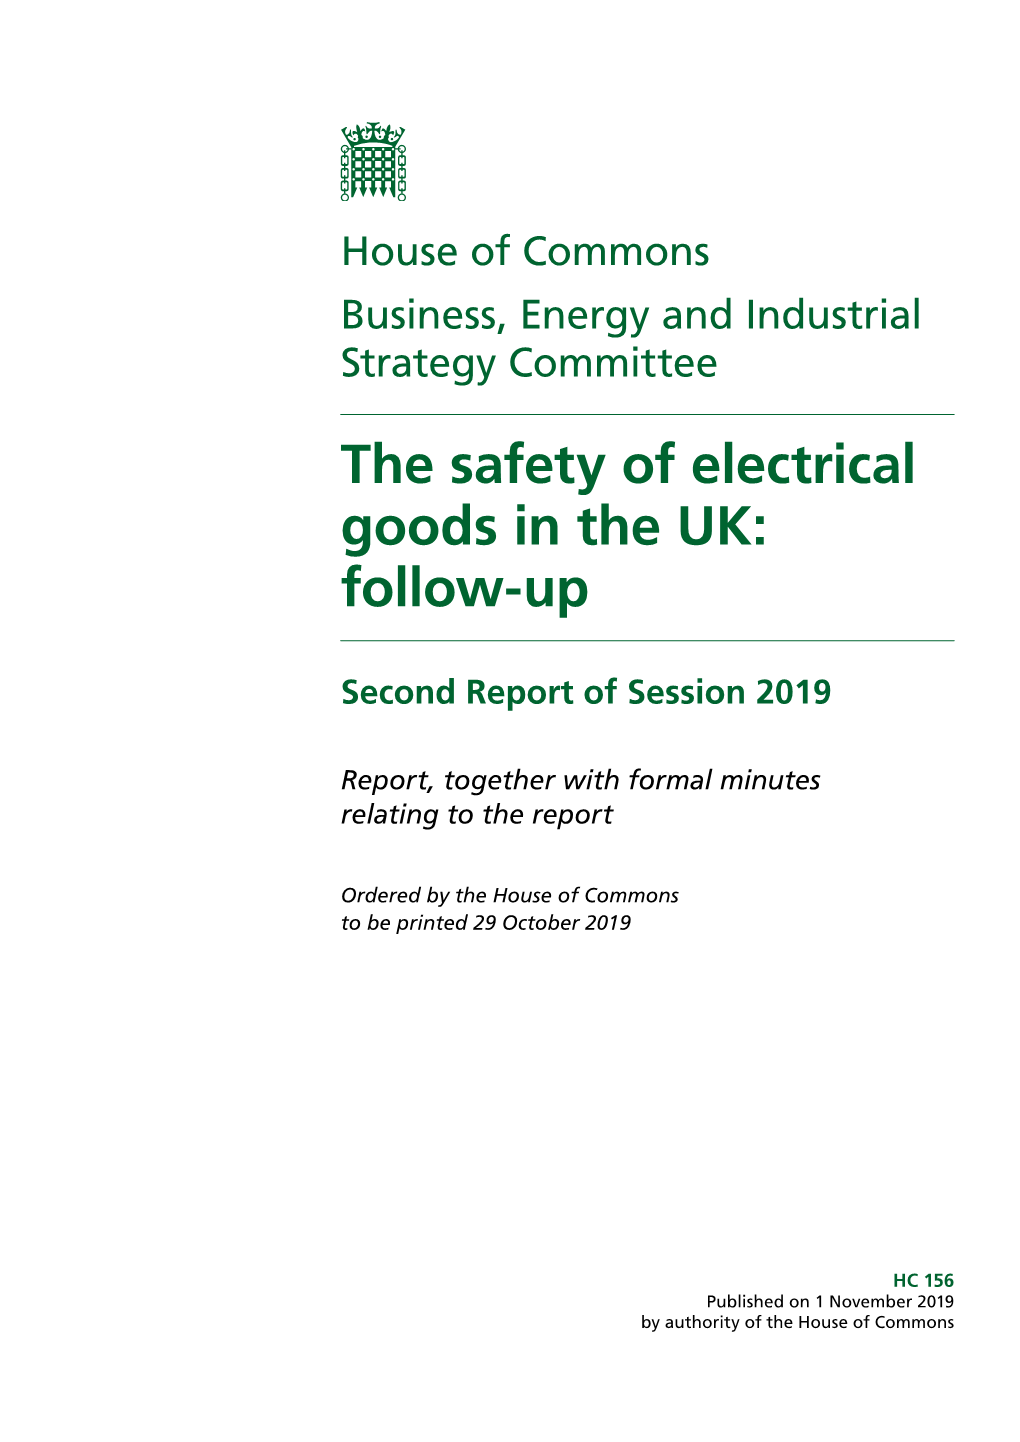 The Safety of Electrical Goods in the UK Follow-Up